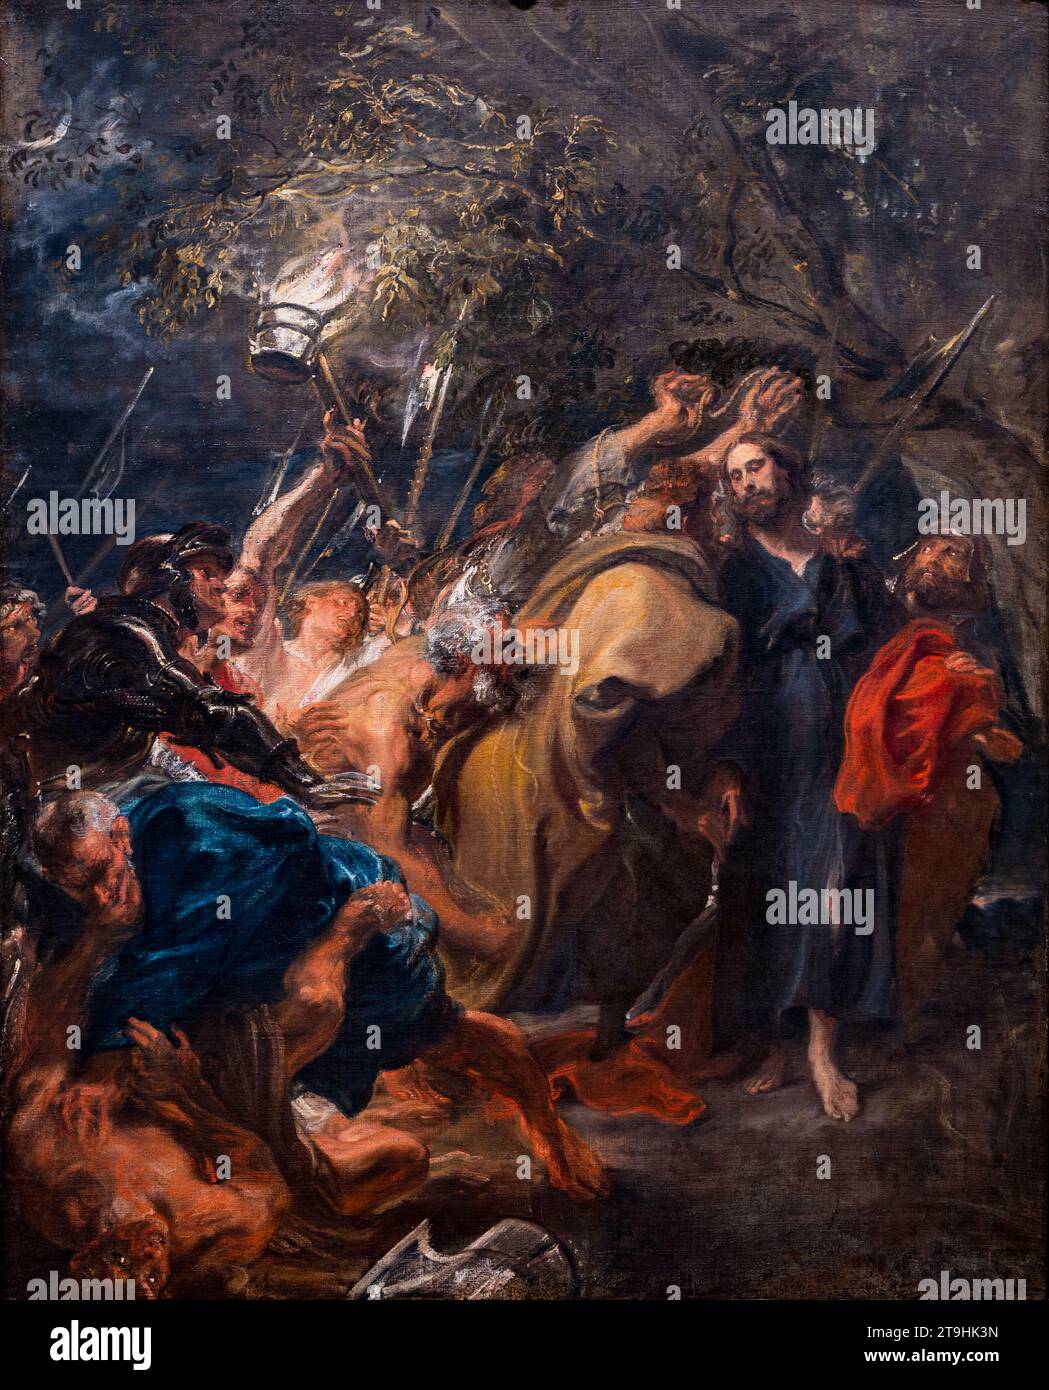 Anthony van Dyck, Flemish, 1599-1641, The Betrayal of Christ, c. 1618-1620, Oil on canvas Stock Photo